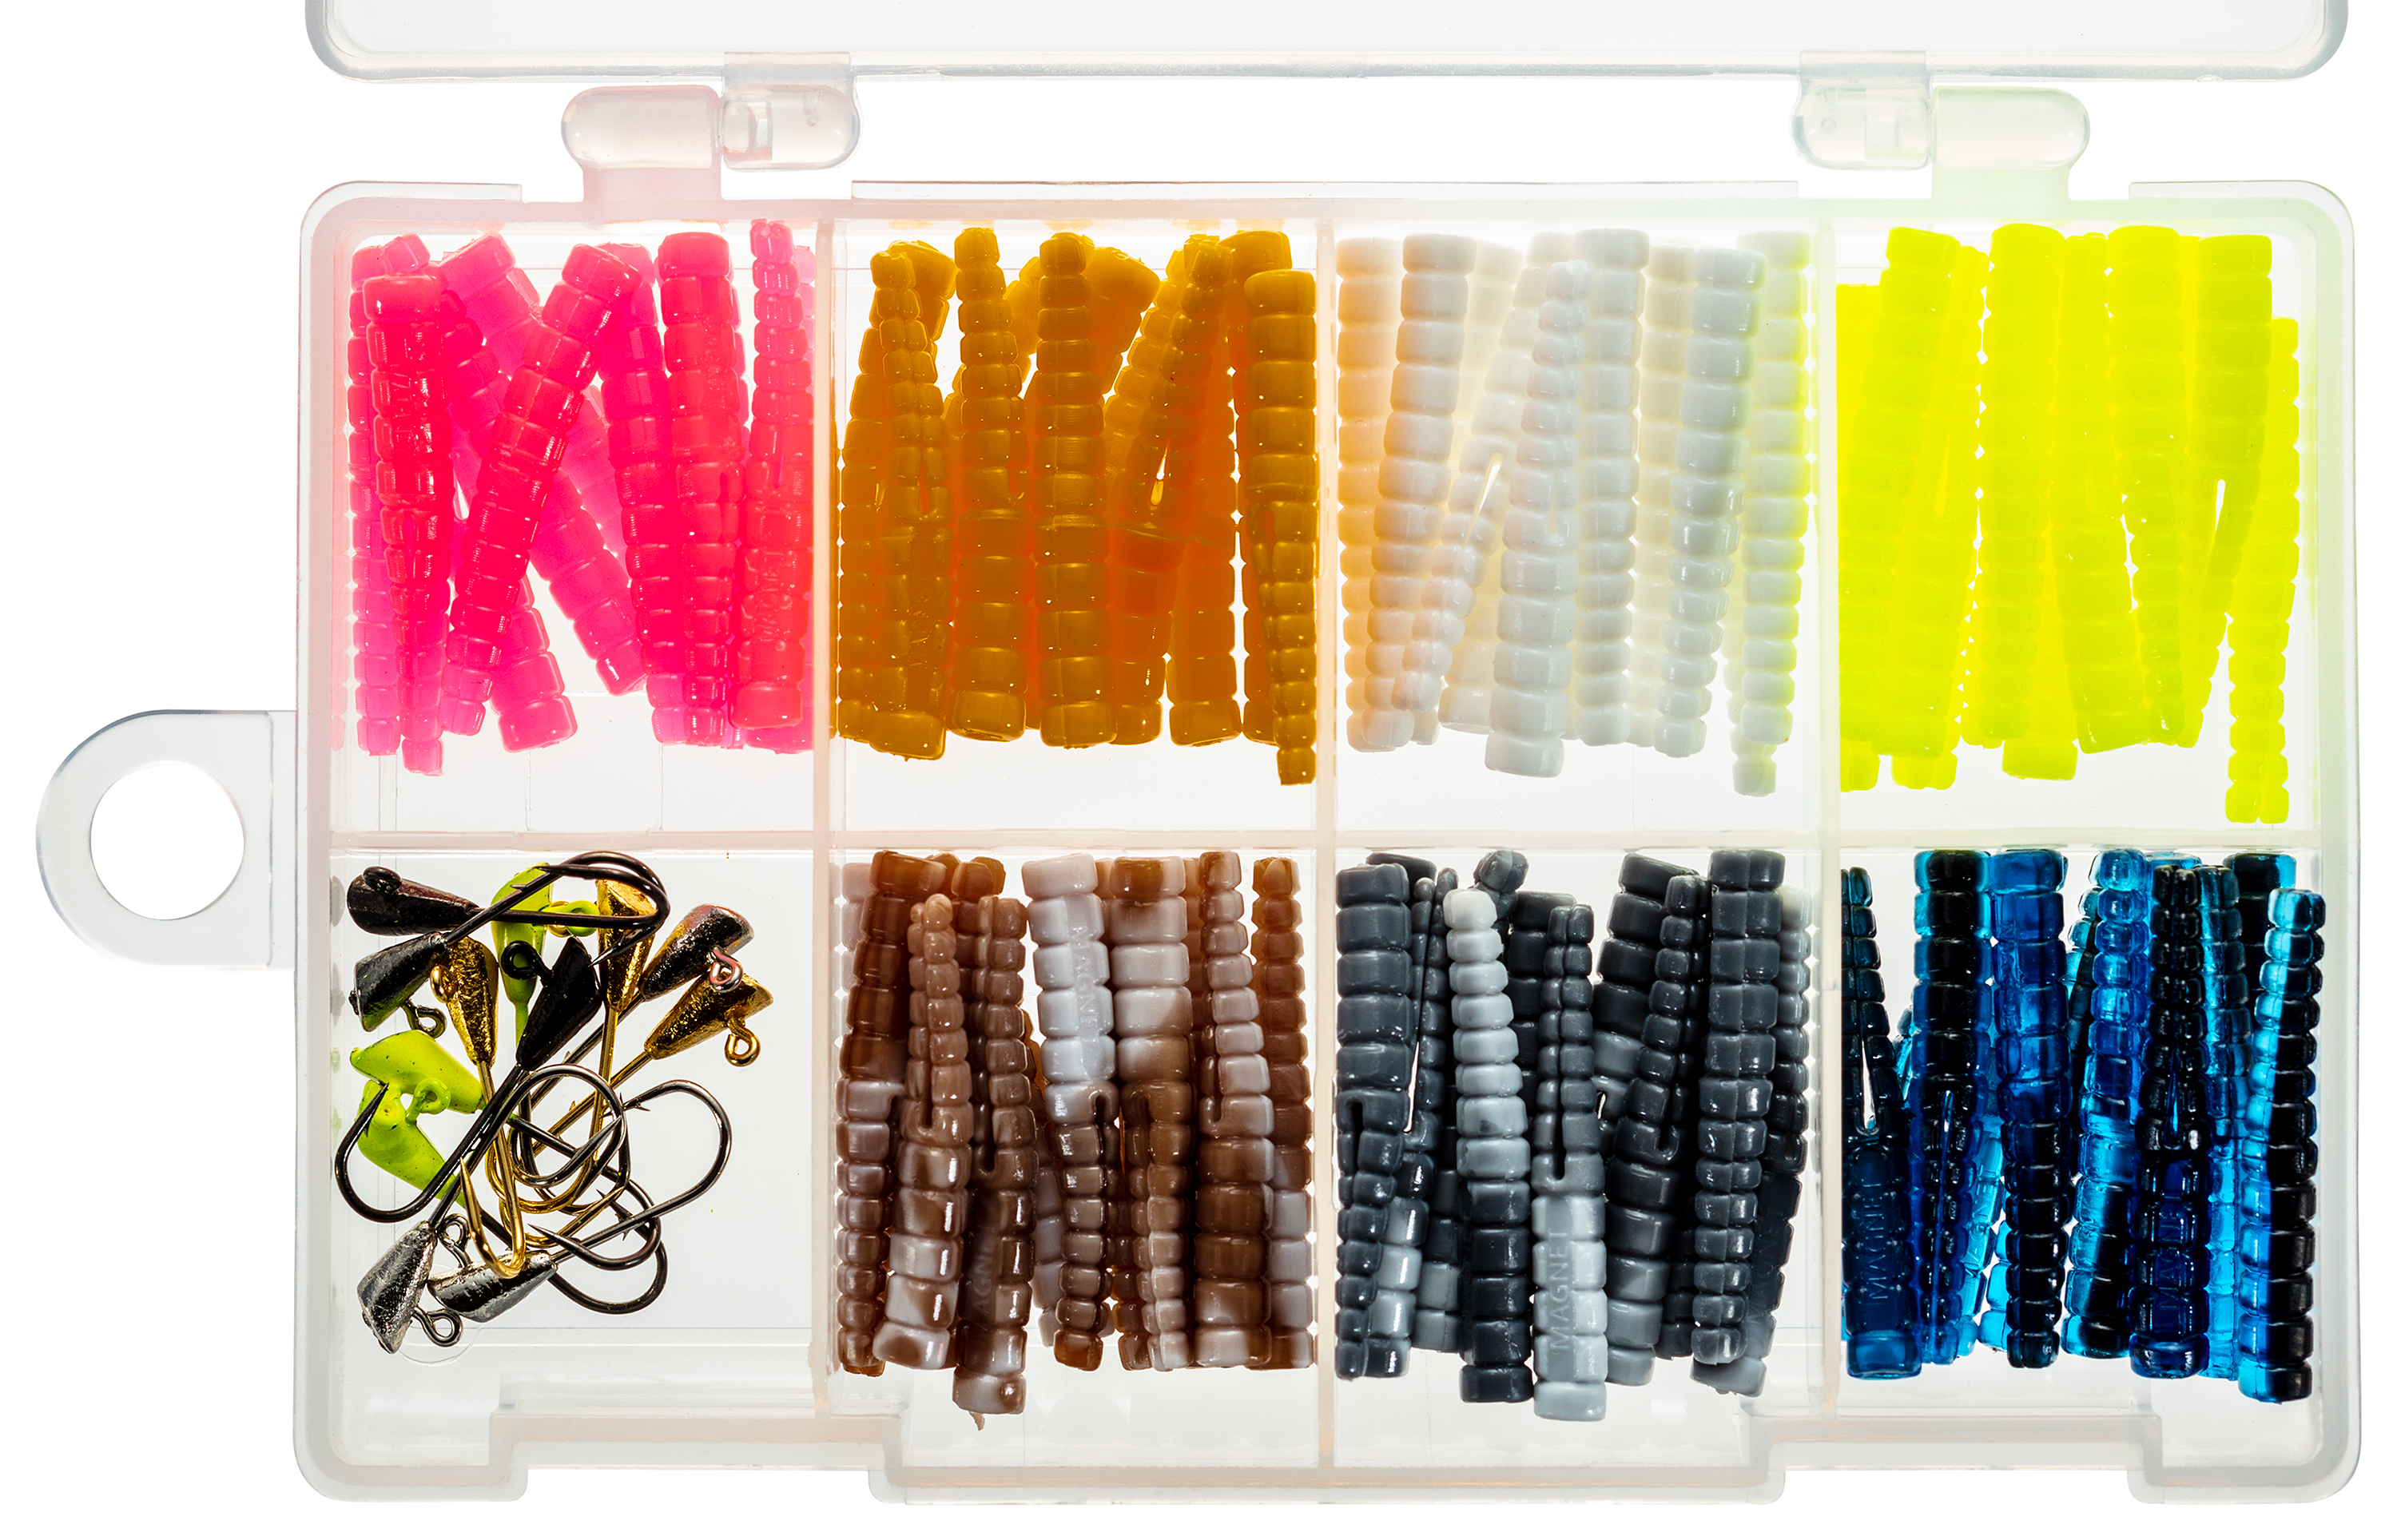 Trout Magnet Original 142 Piece Kit, Fishing Equipment and Accessories, 20  Hooks, 120 Bodies, 2 Floats, Lure Kits -  Canada